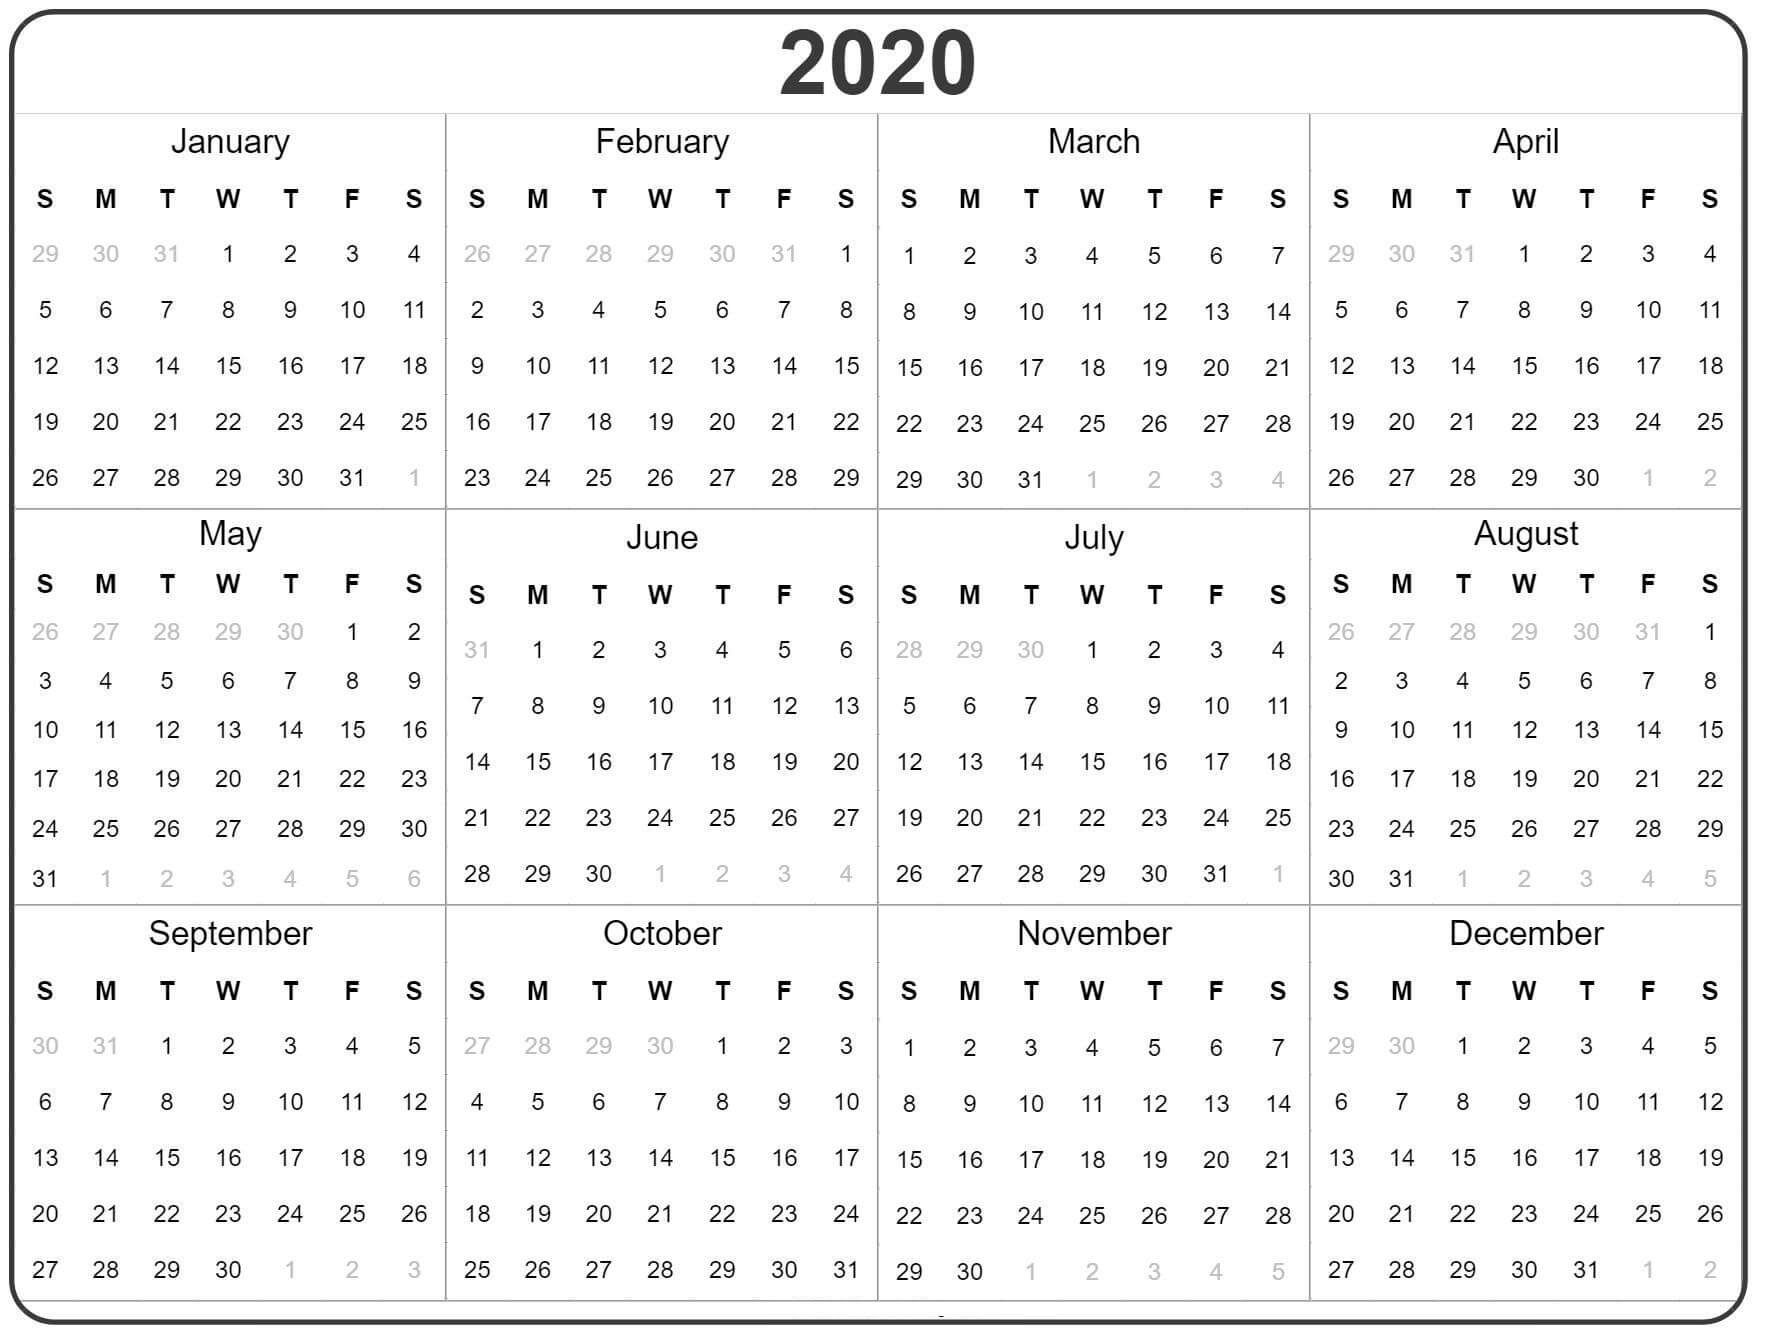 Free Yearly Calendar 2020 With Notes - 2019 Calendars For with 2020 Year T A Glance Calendar